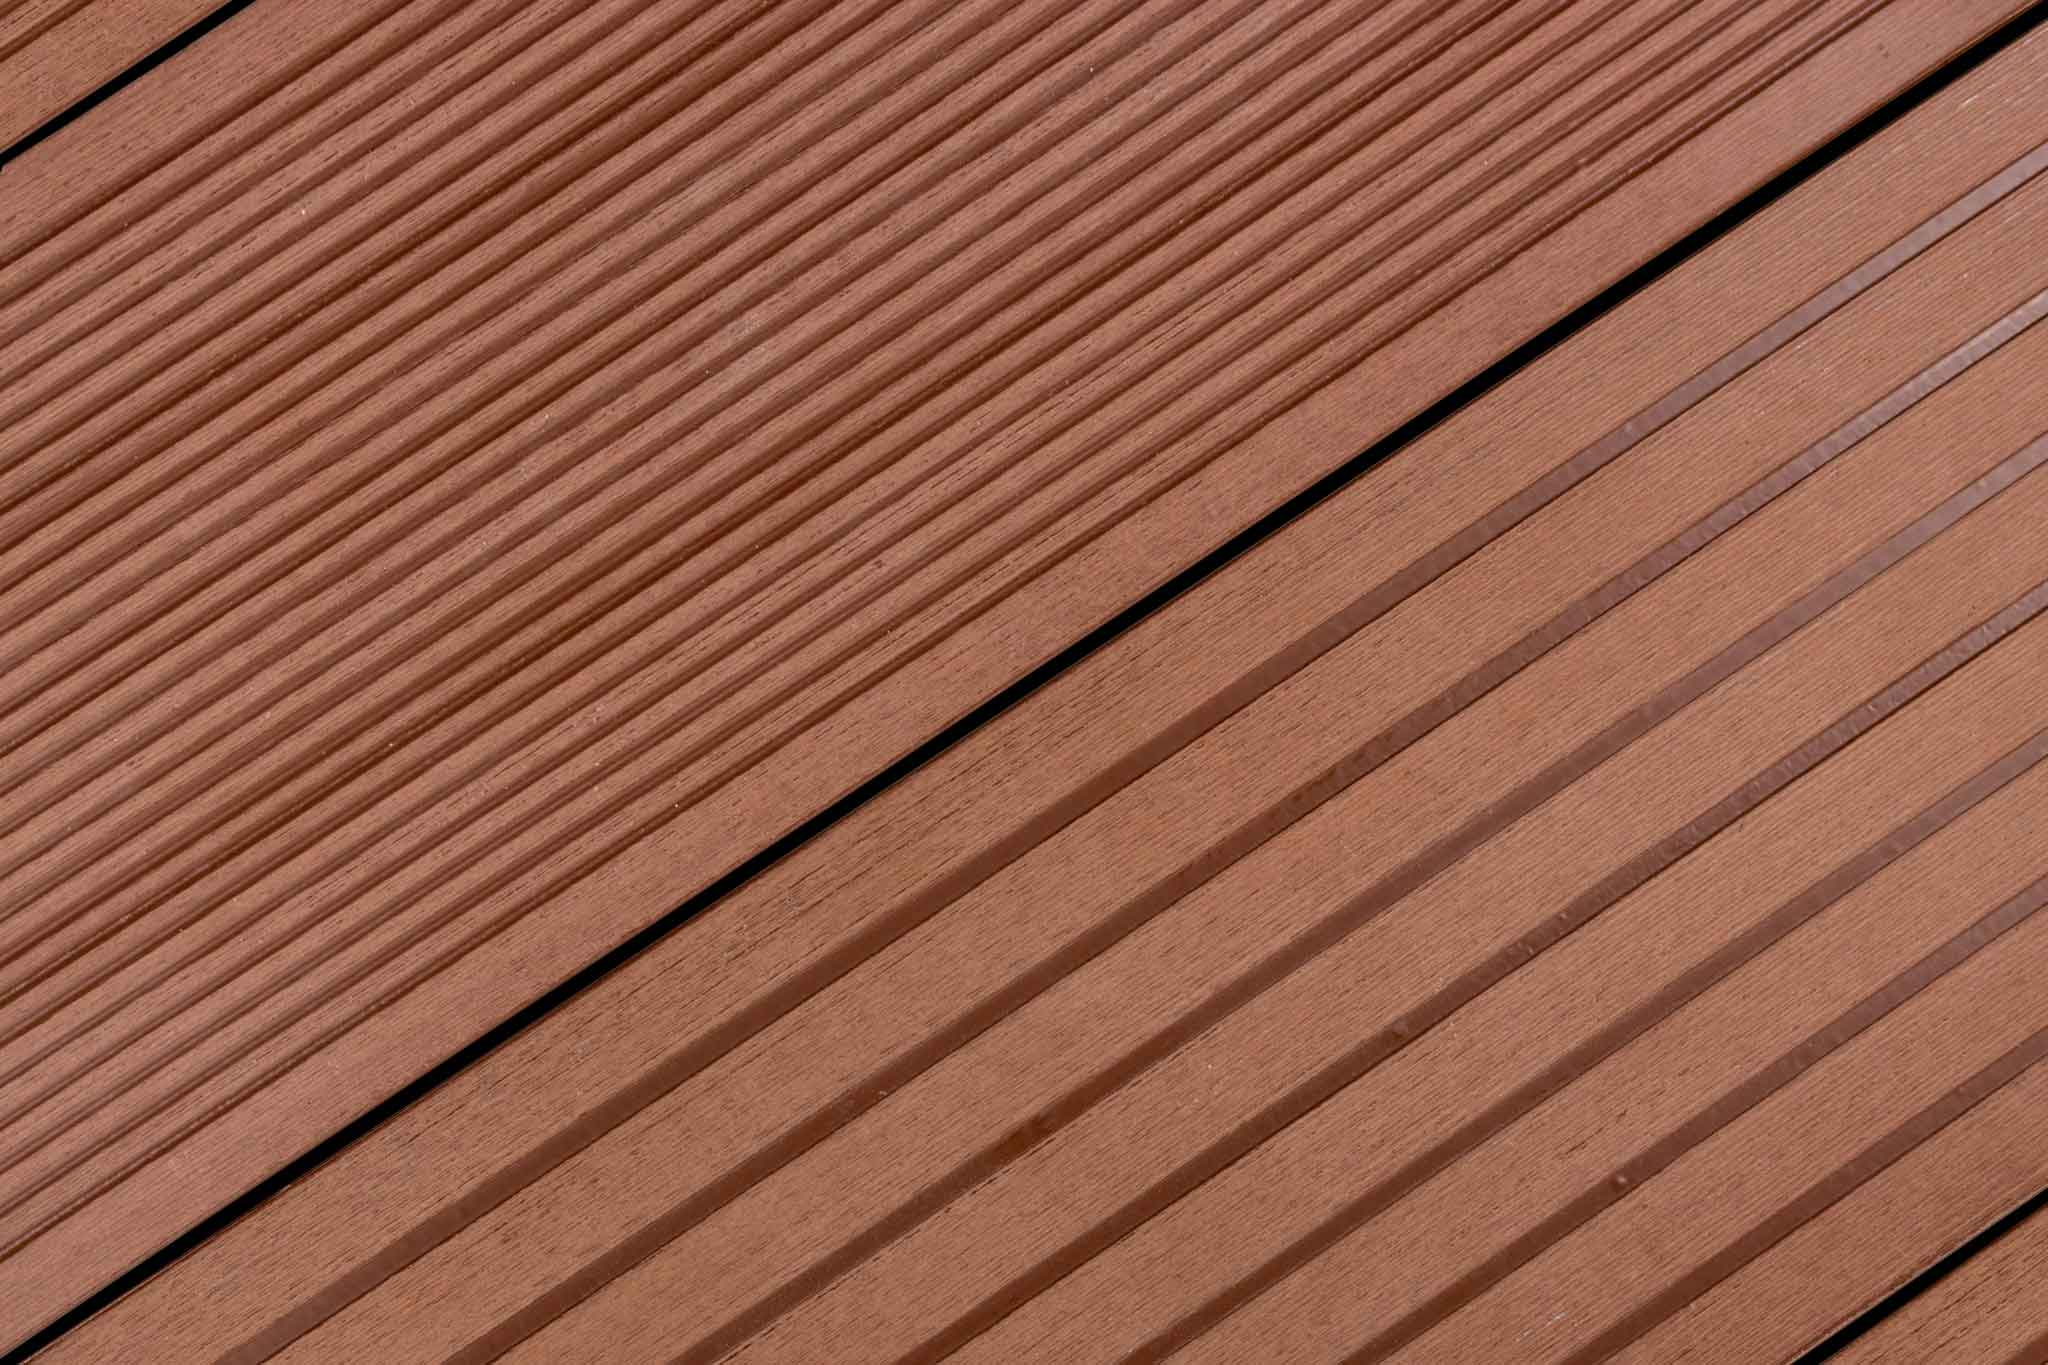 NaturaPlus™ | Terracotta Grooved Composite Decking Board (3m length)